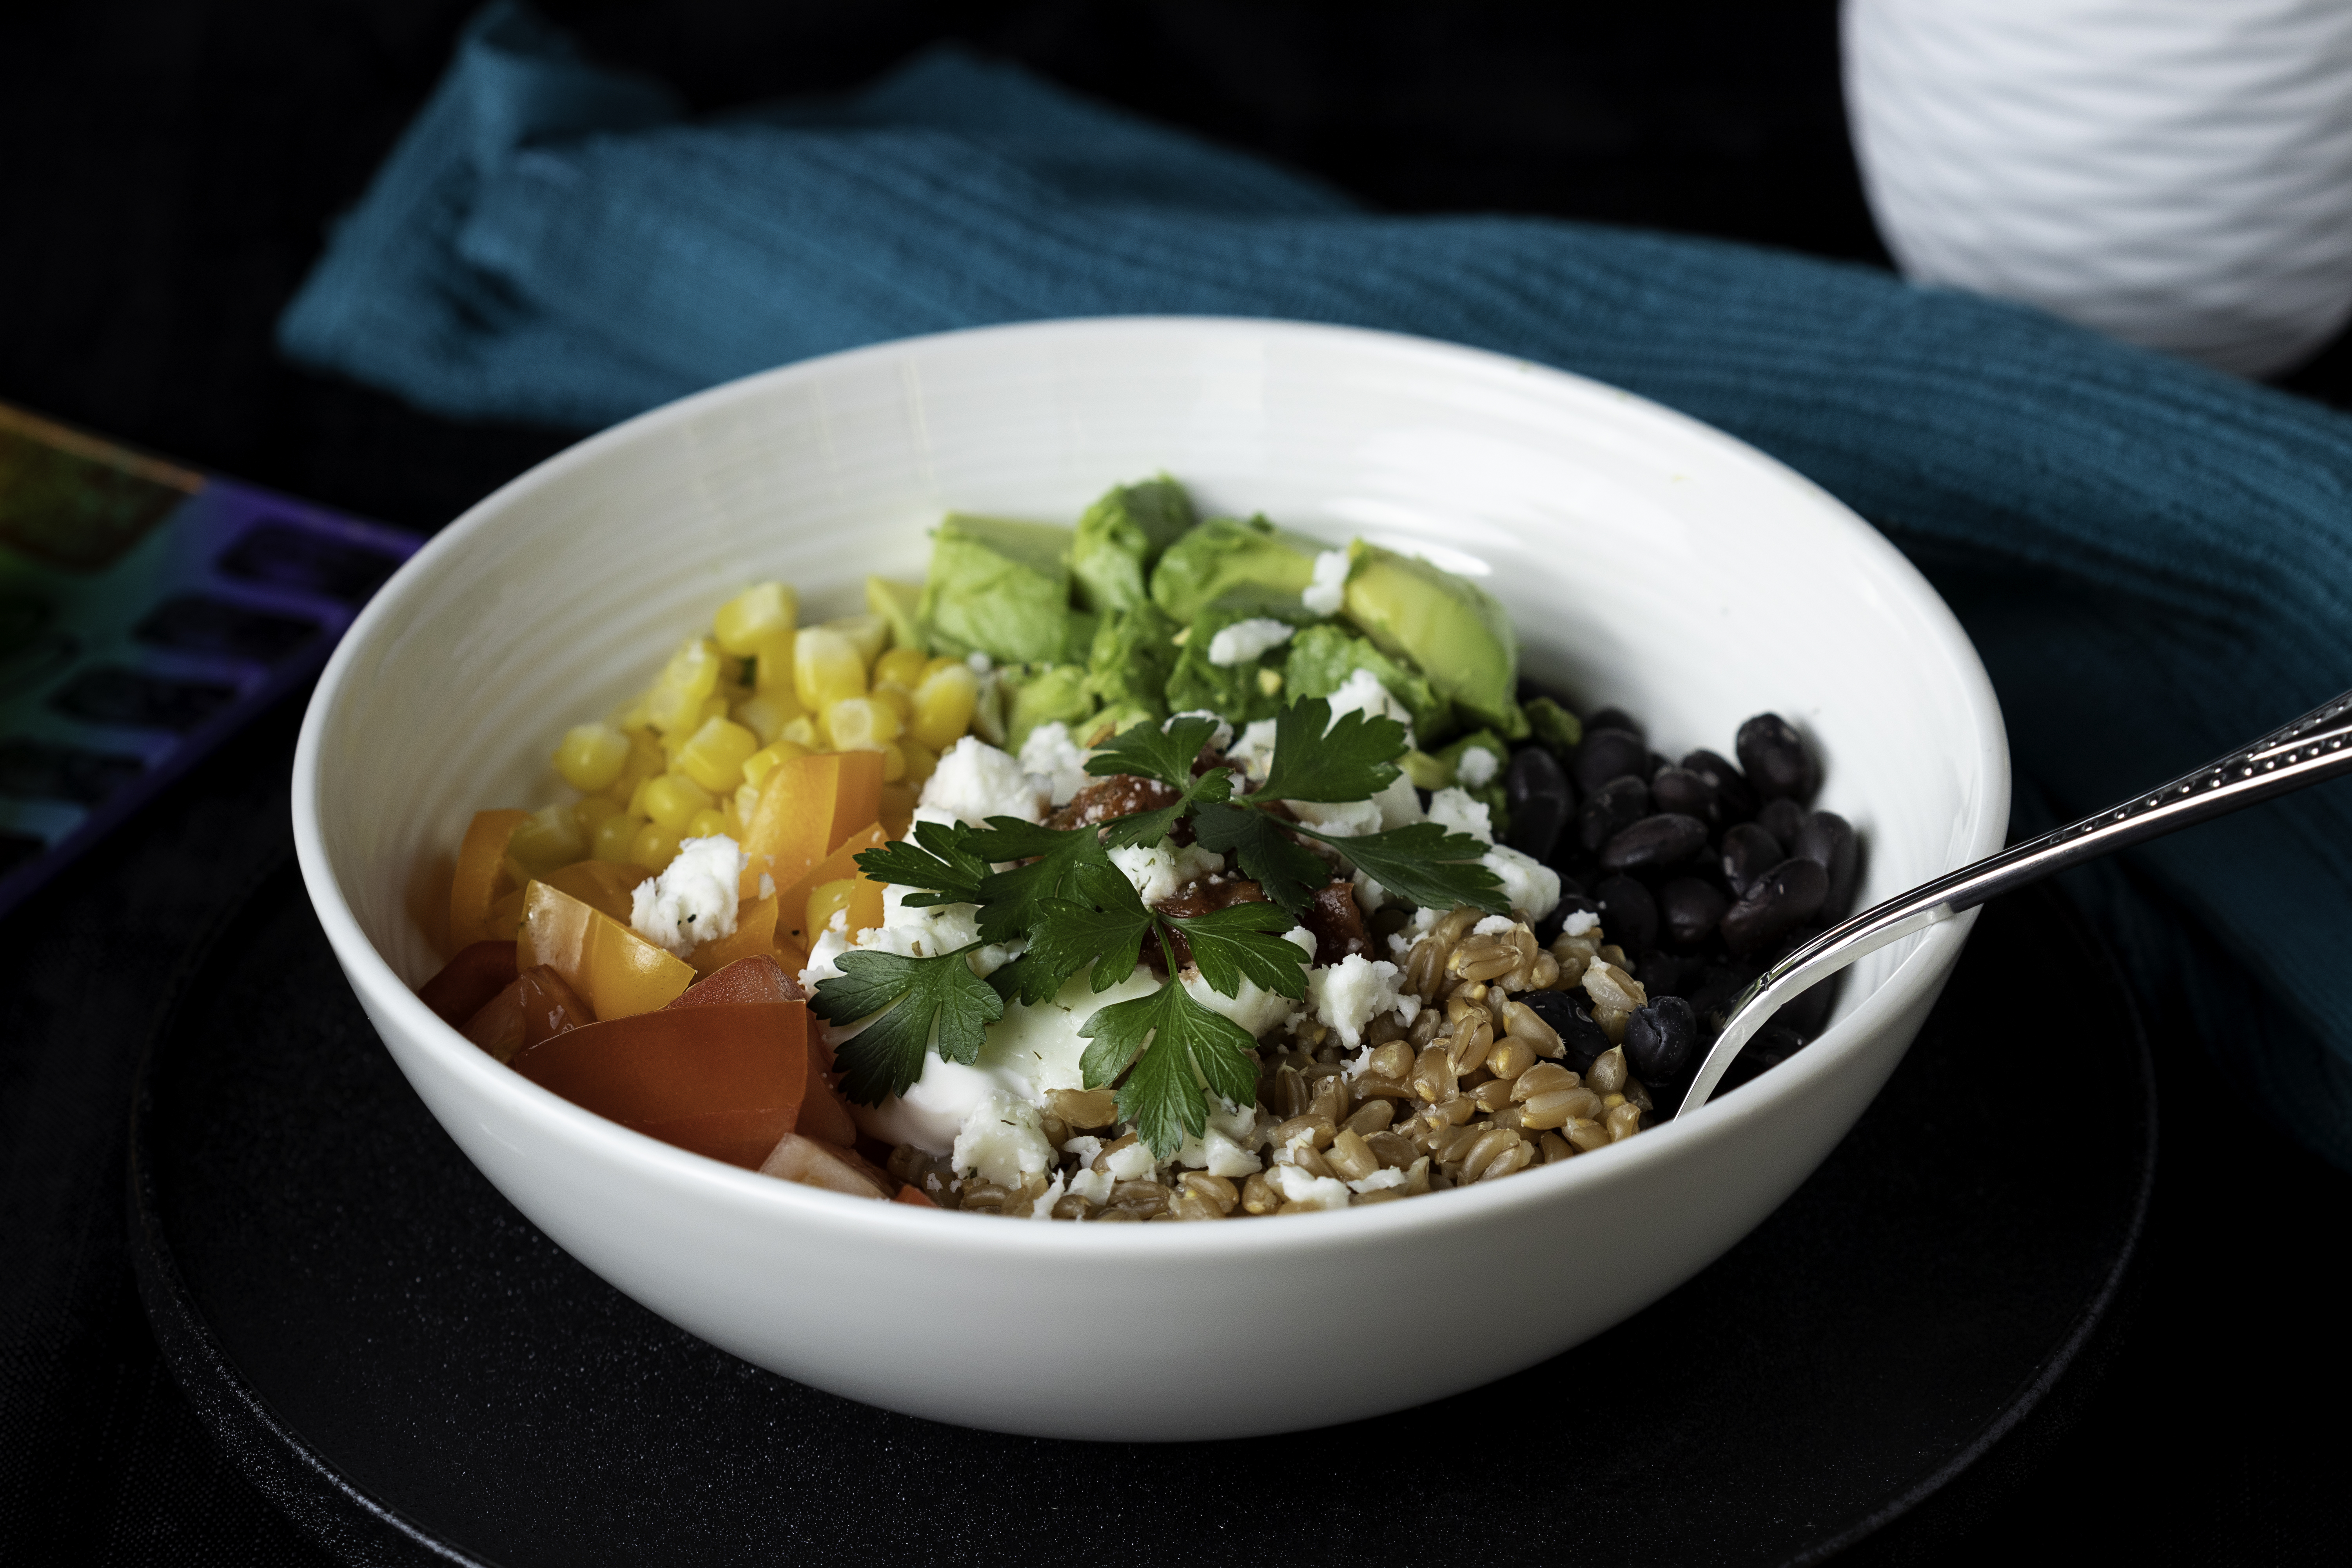 A white bowl filled with fresh ingredients like corn, tomatoes, rice and parsley.